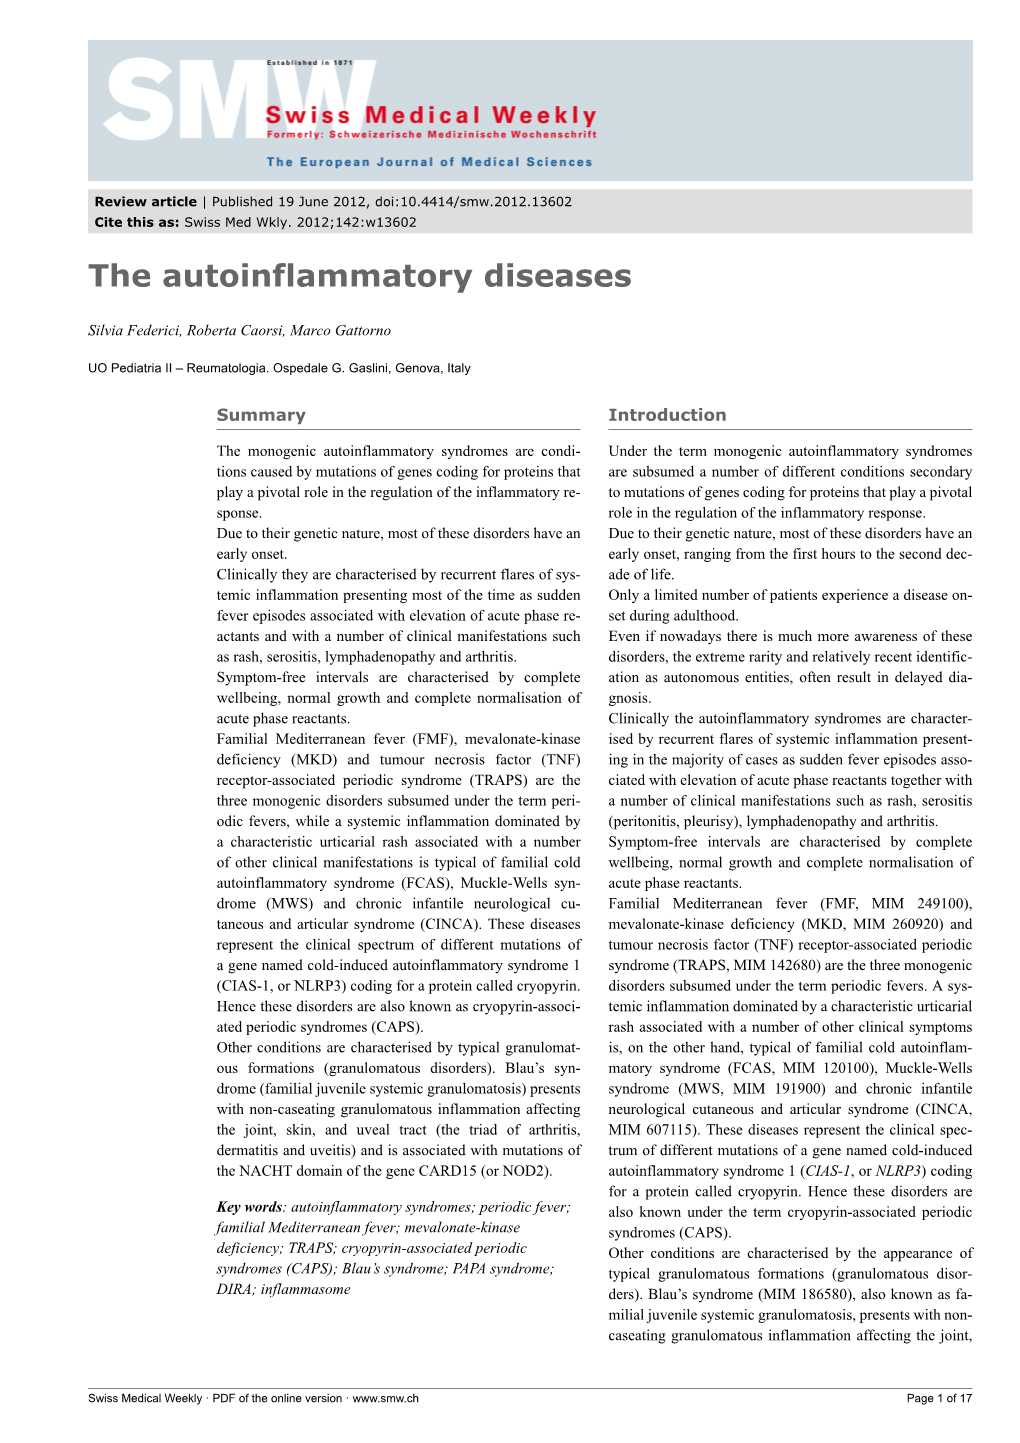 The Autoinflammatory Diseases